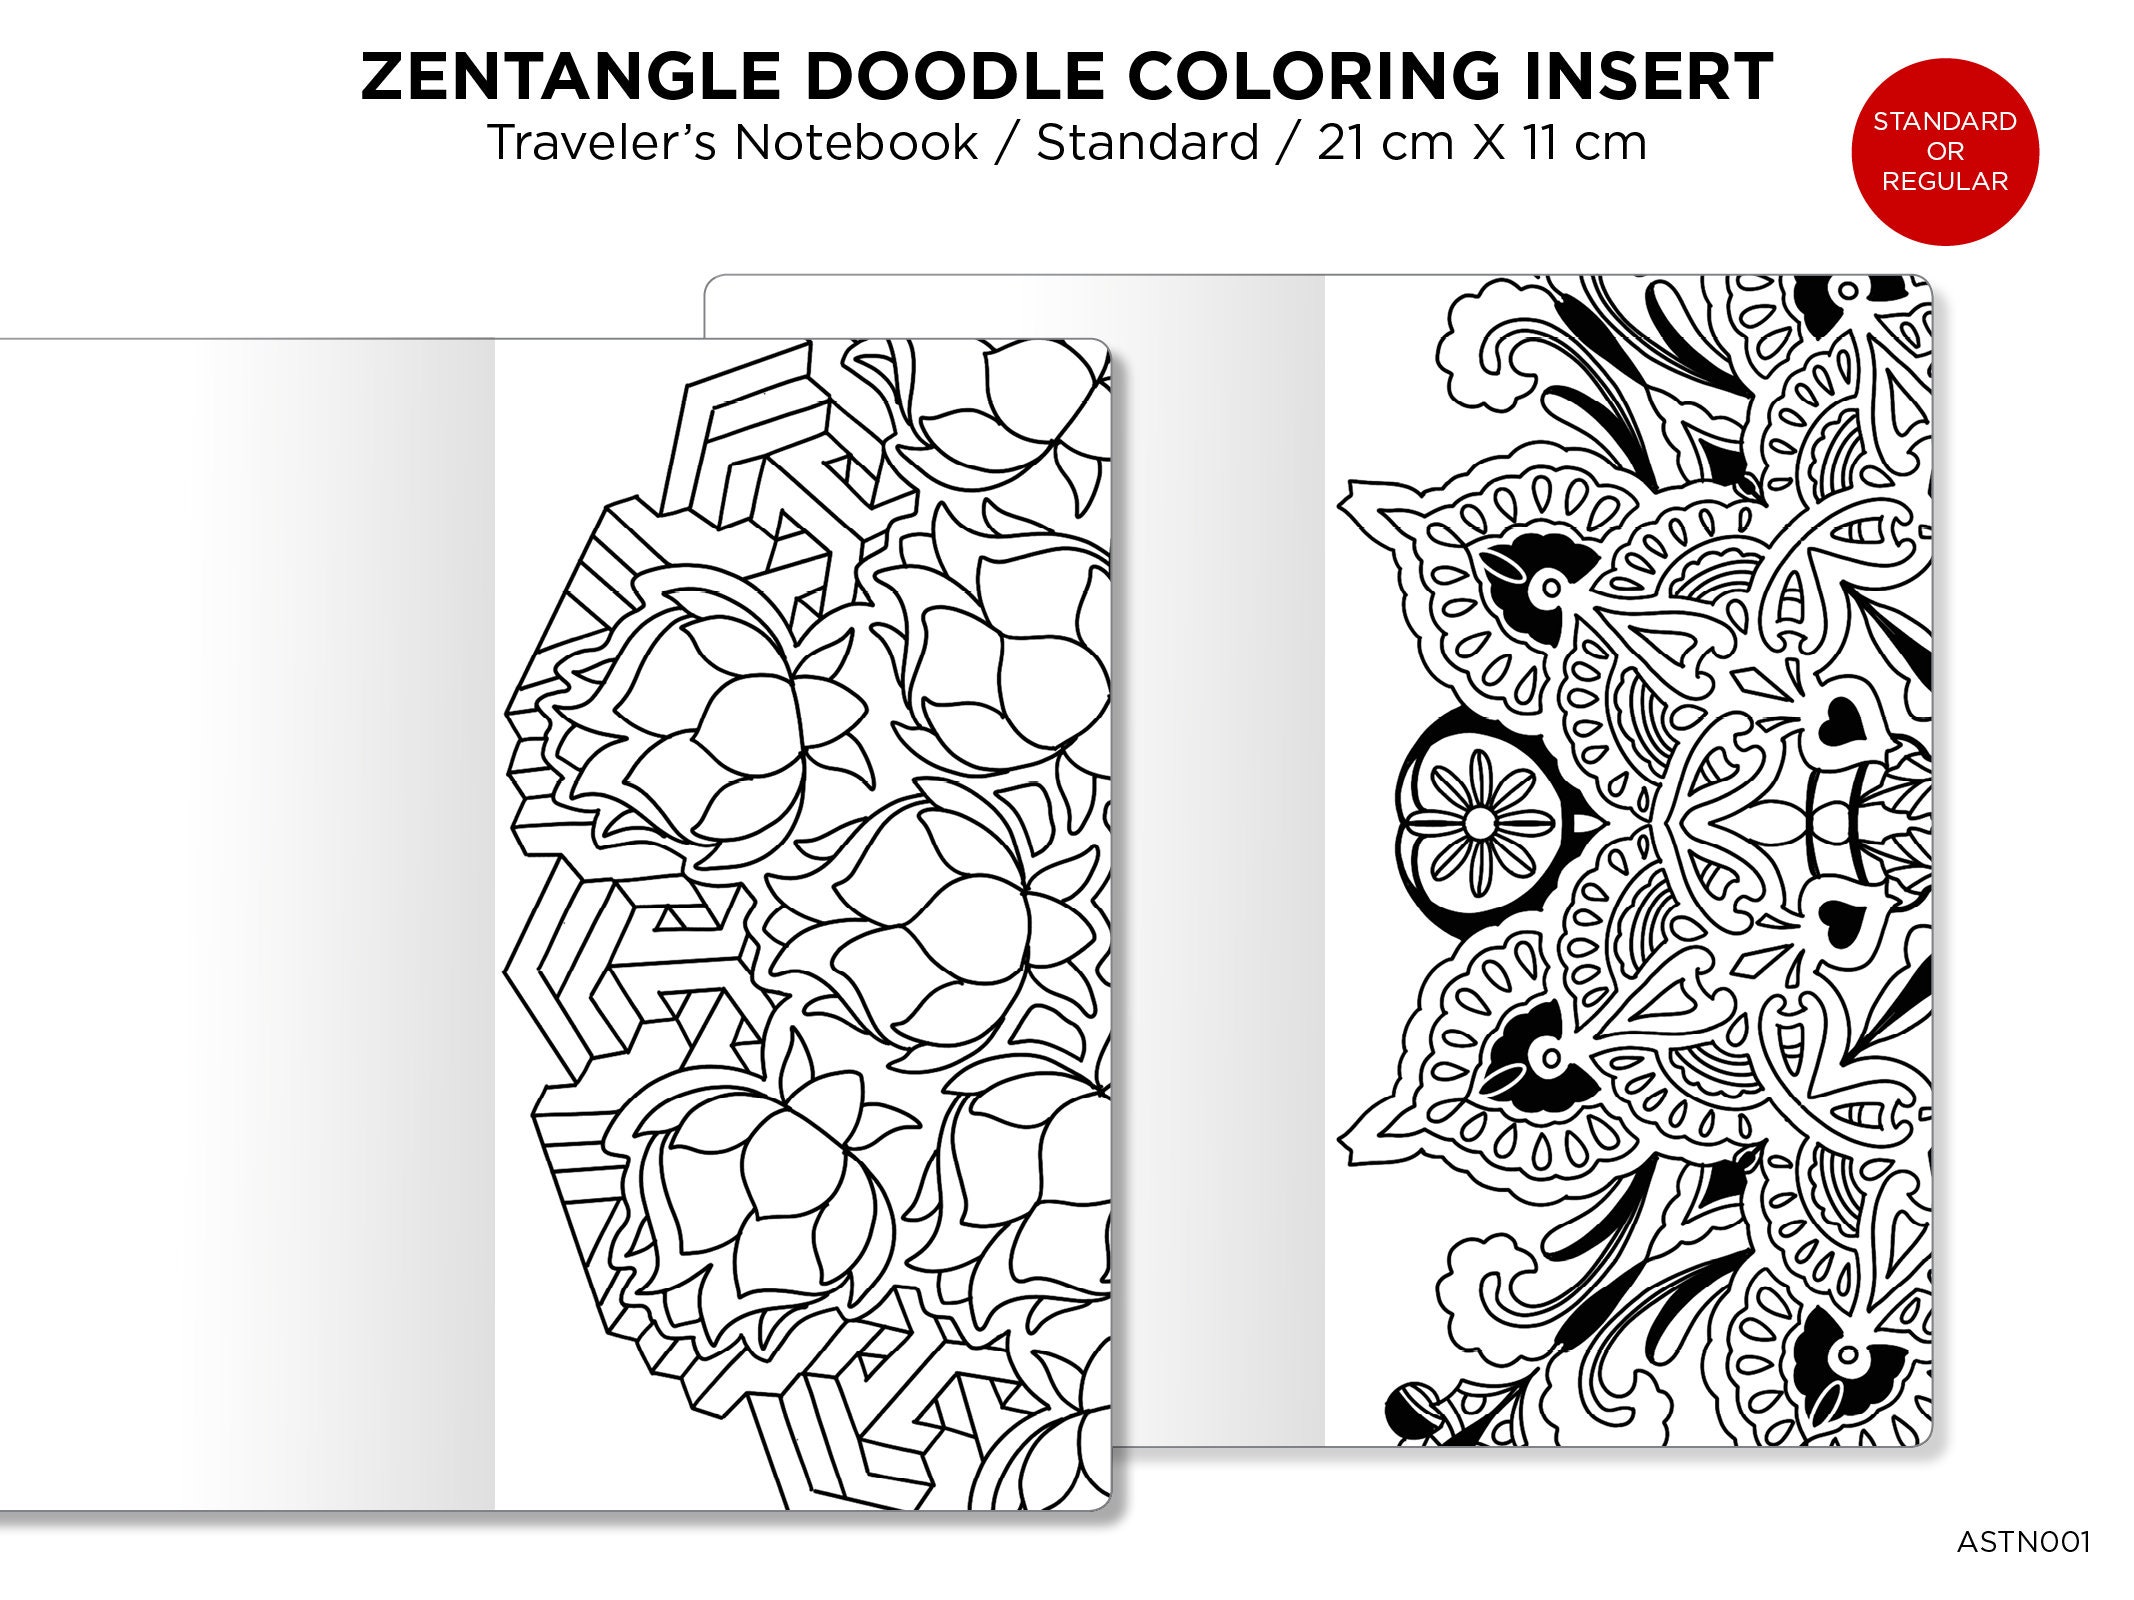 Printable Mandala Coloring Pages - 12 Coloring pages for adults or kids -  Ready to print PDF